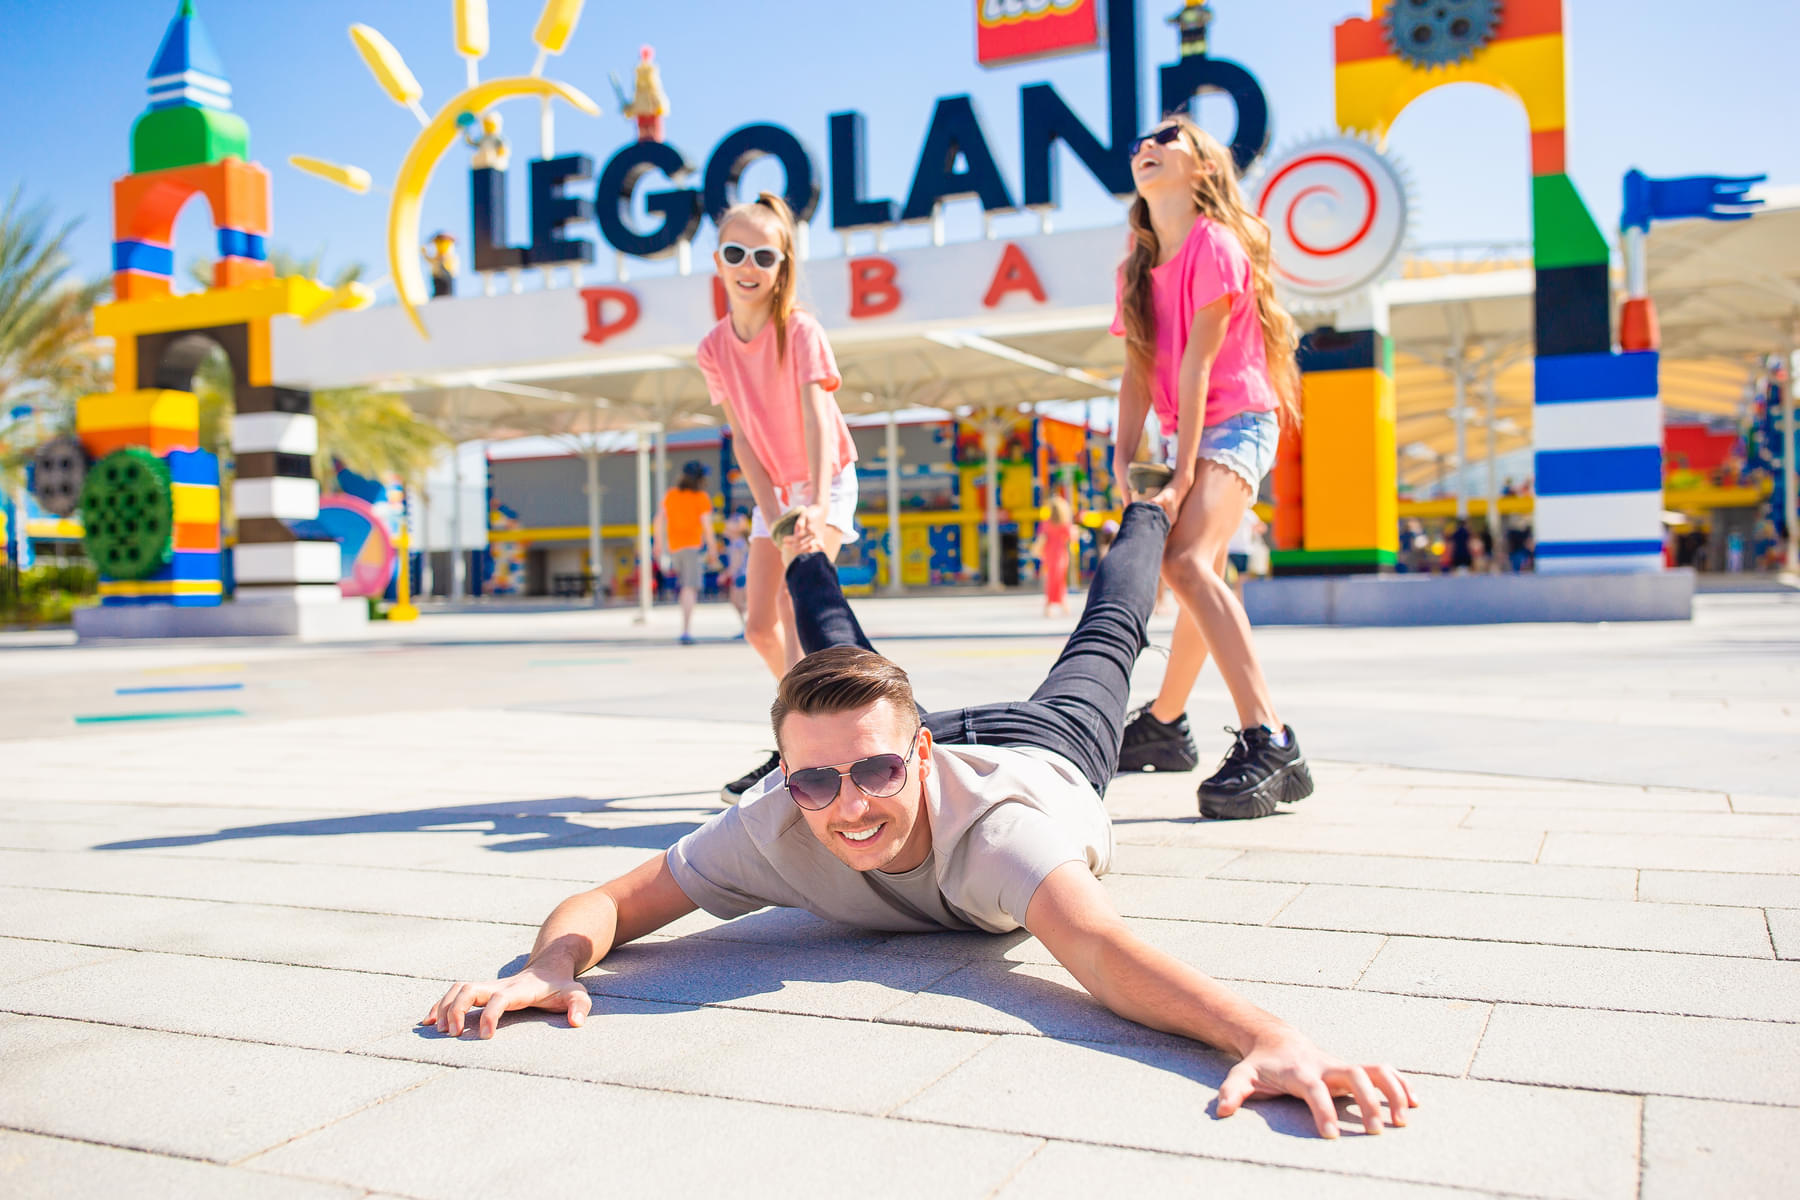 Bring your kids and have a fun day out at Legoland Park